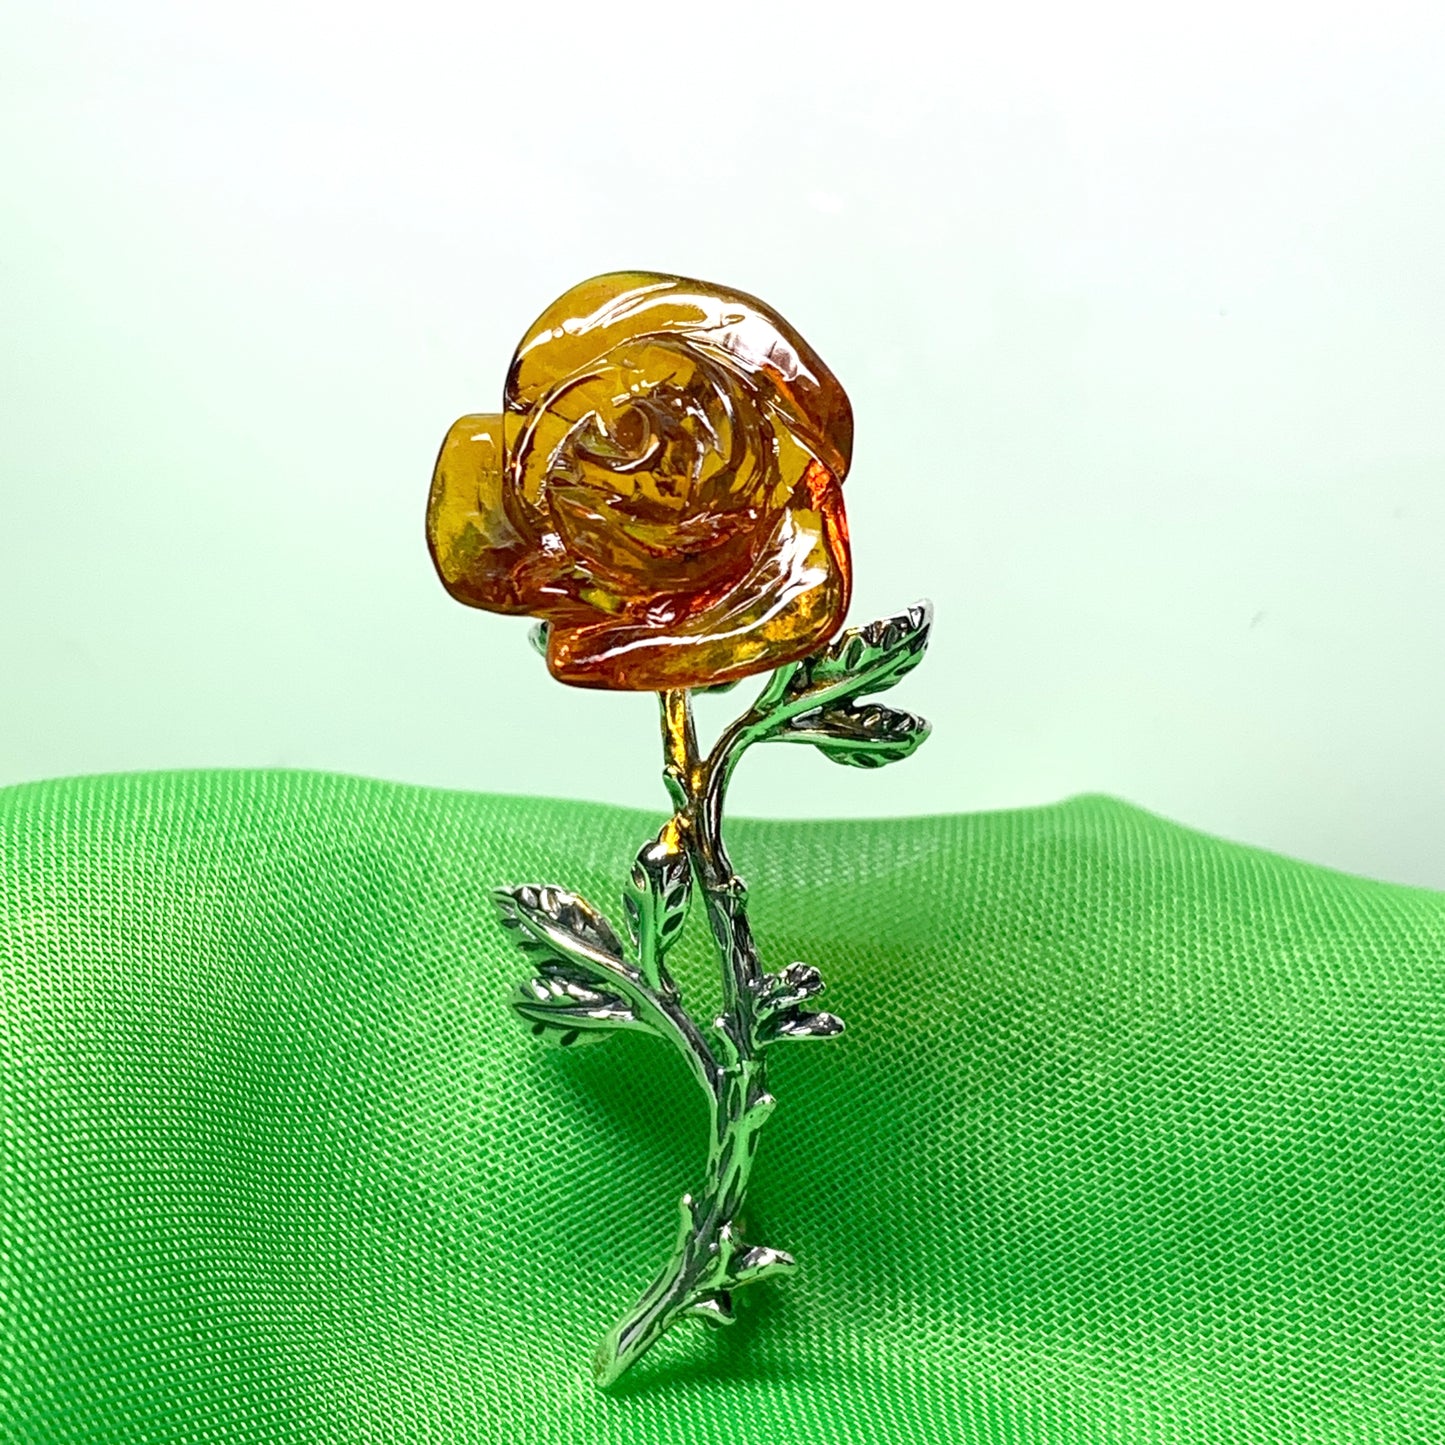 Silver Amber Rose Shaped Brooch